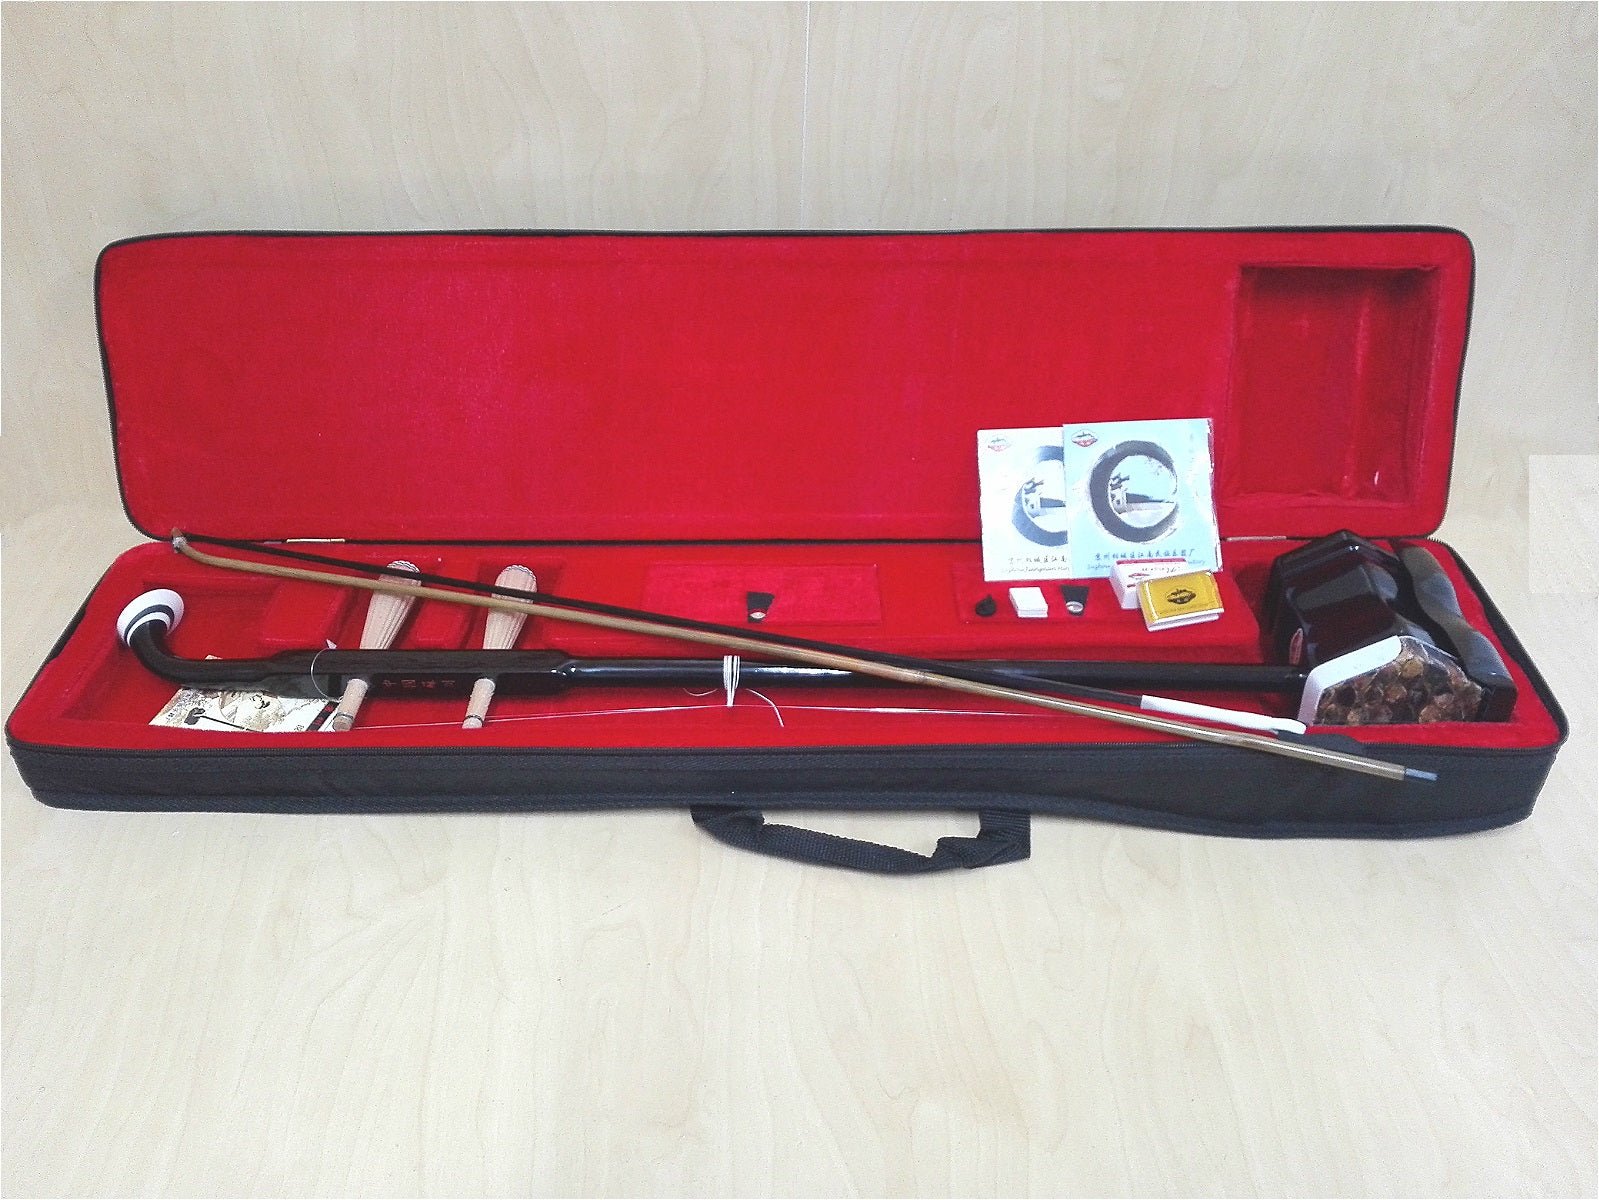 L129 Chinese 2-stringed Fiddle,Erhu, Solid Timber Body,Neck + Foam Case, Extra String